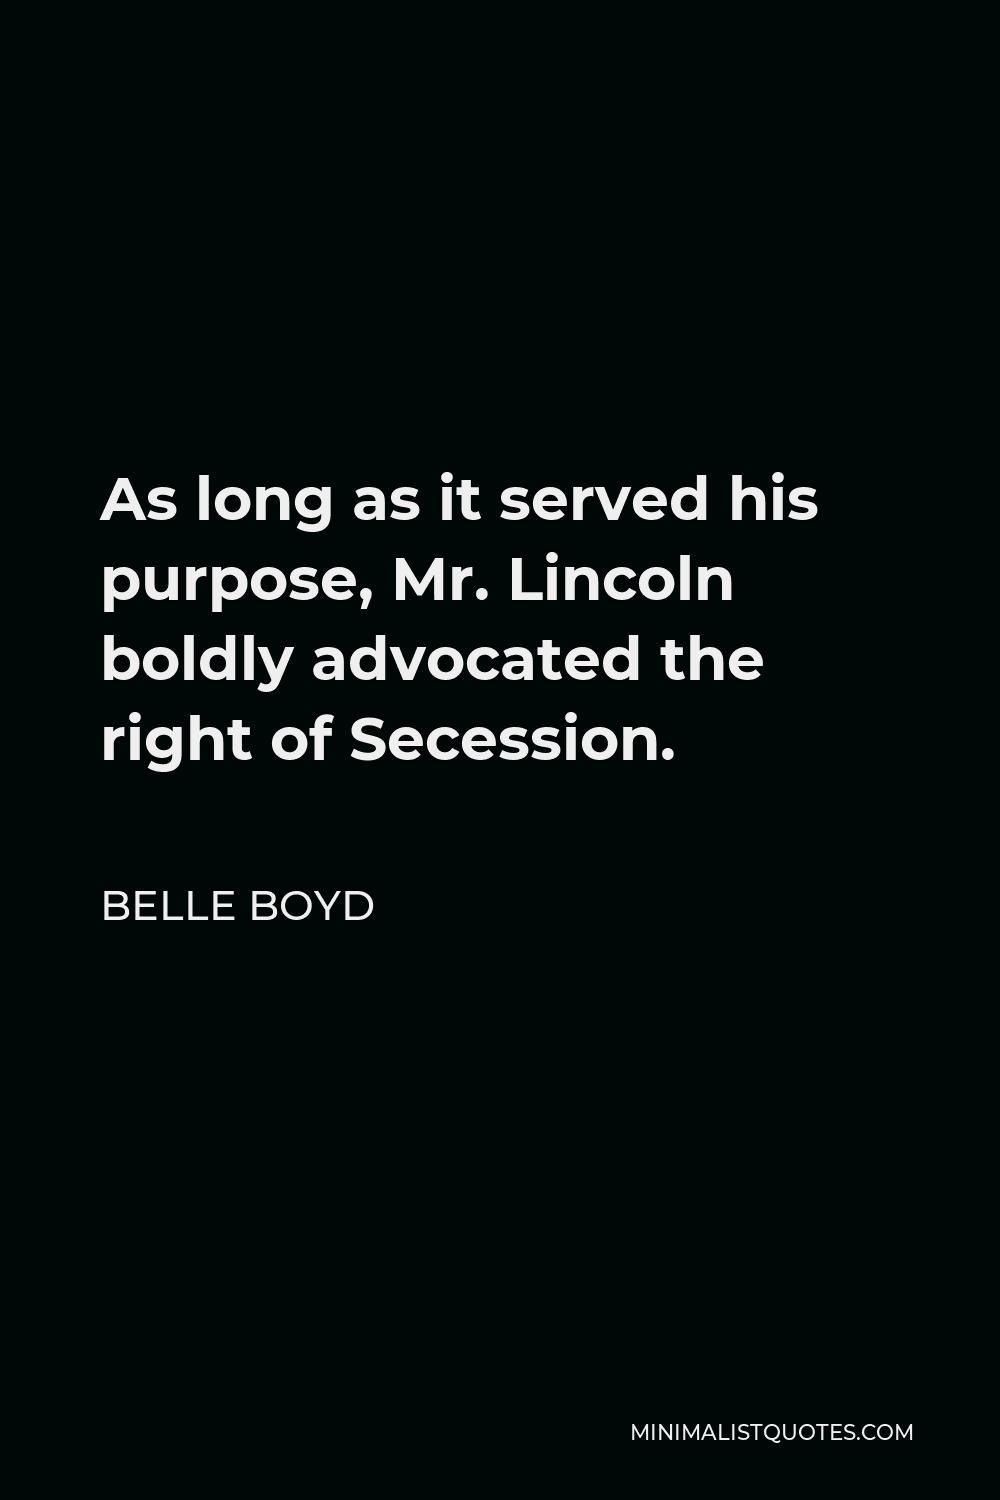 Belle Boyd Quote - As long as it served his purpose, Mr. Lincoln boldly advocated the right of Secession.